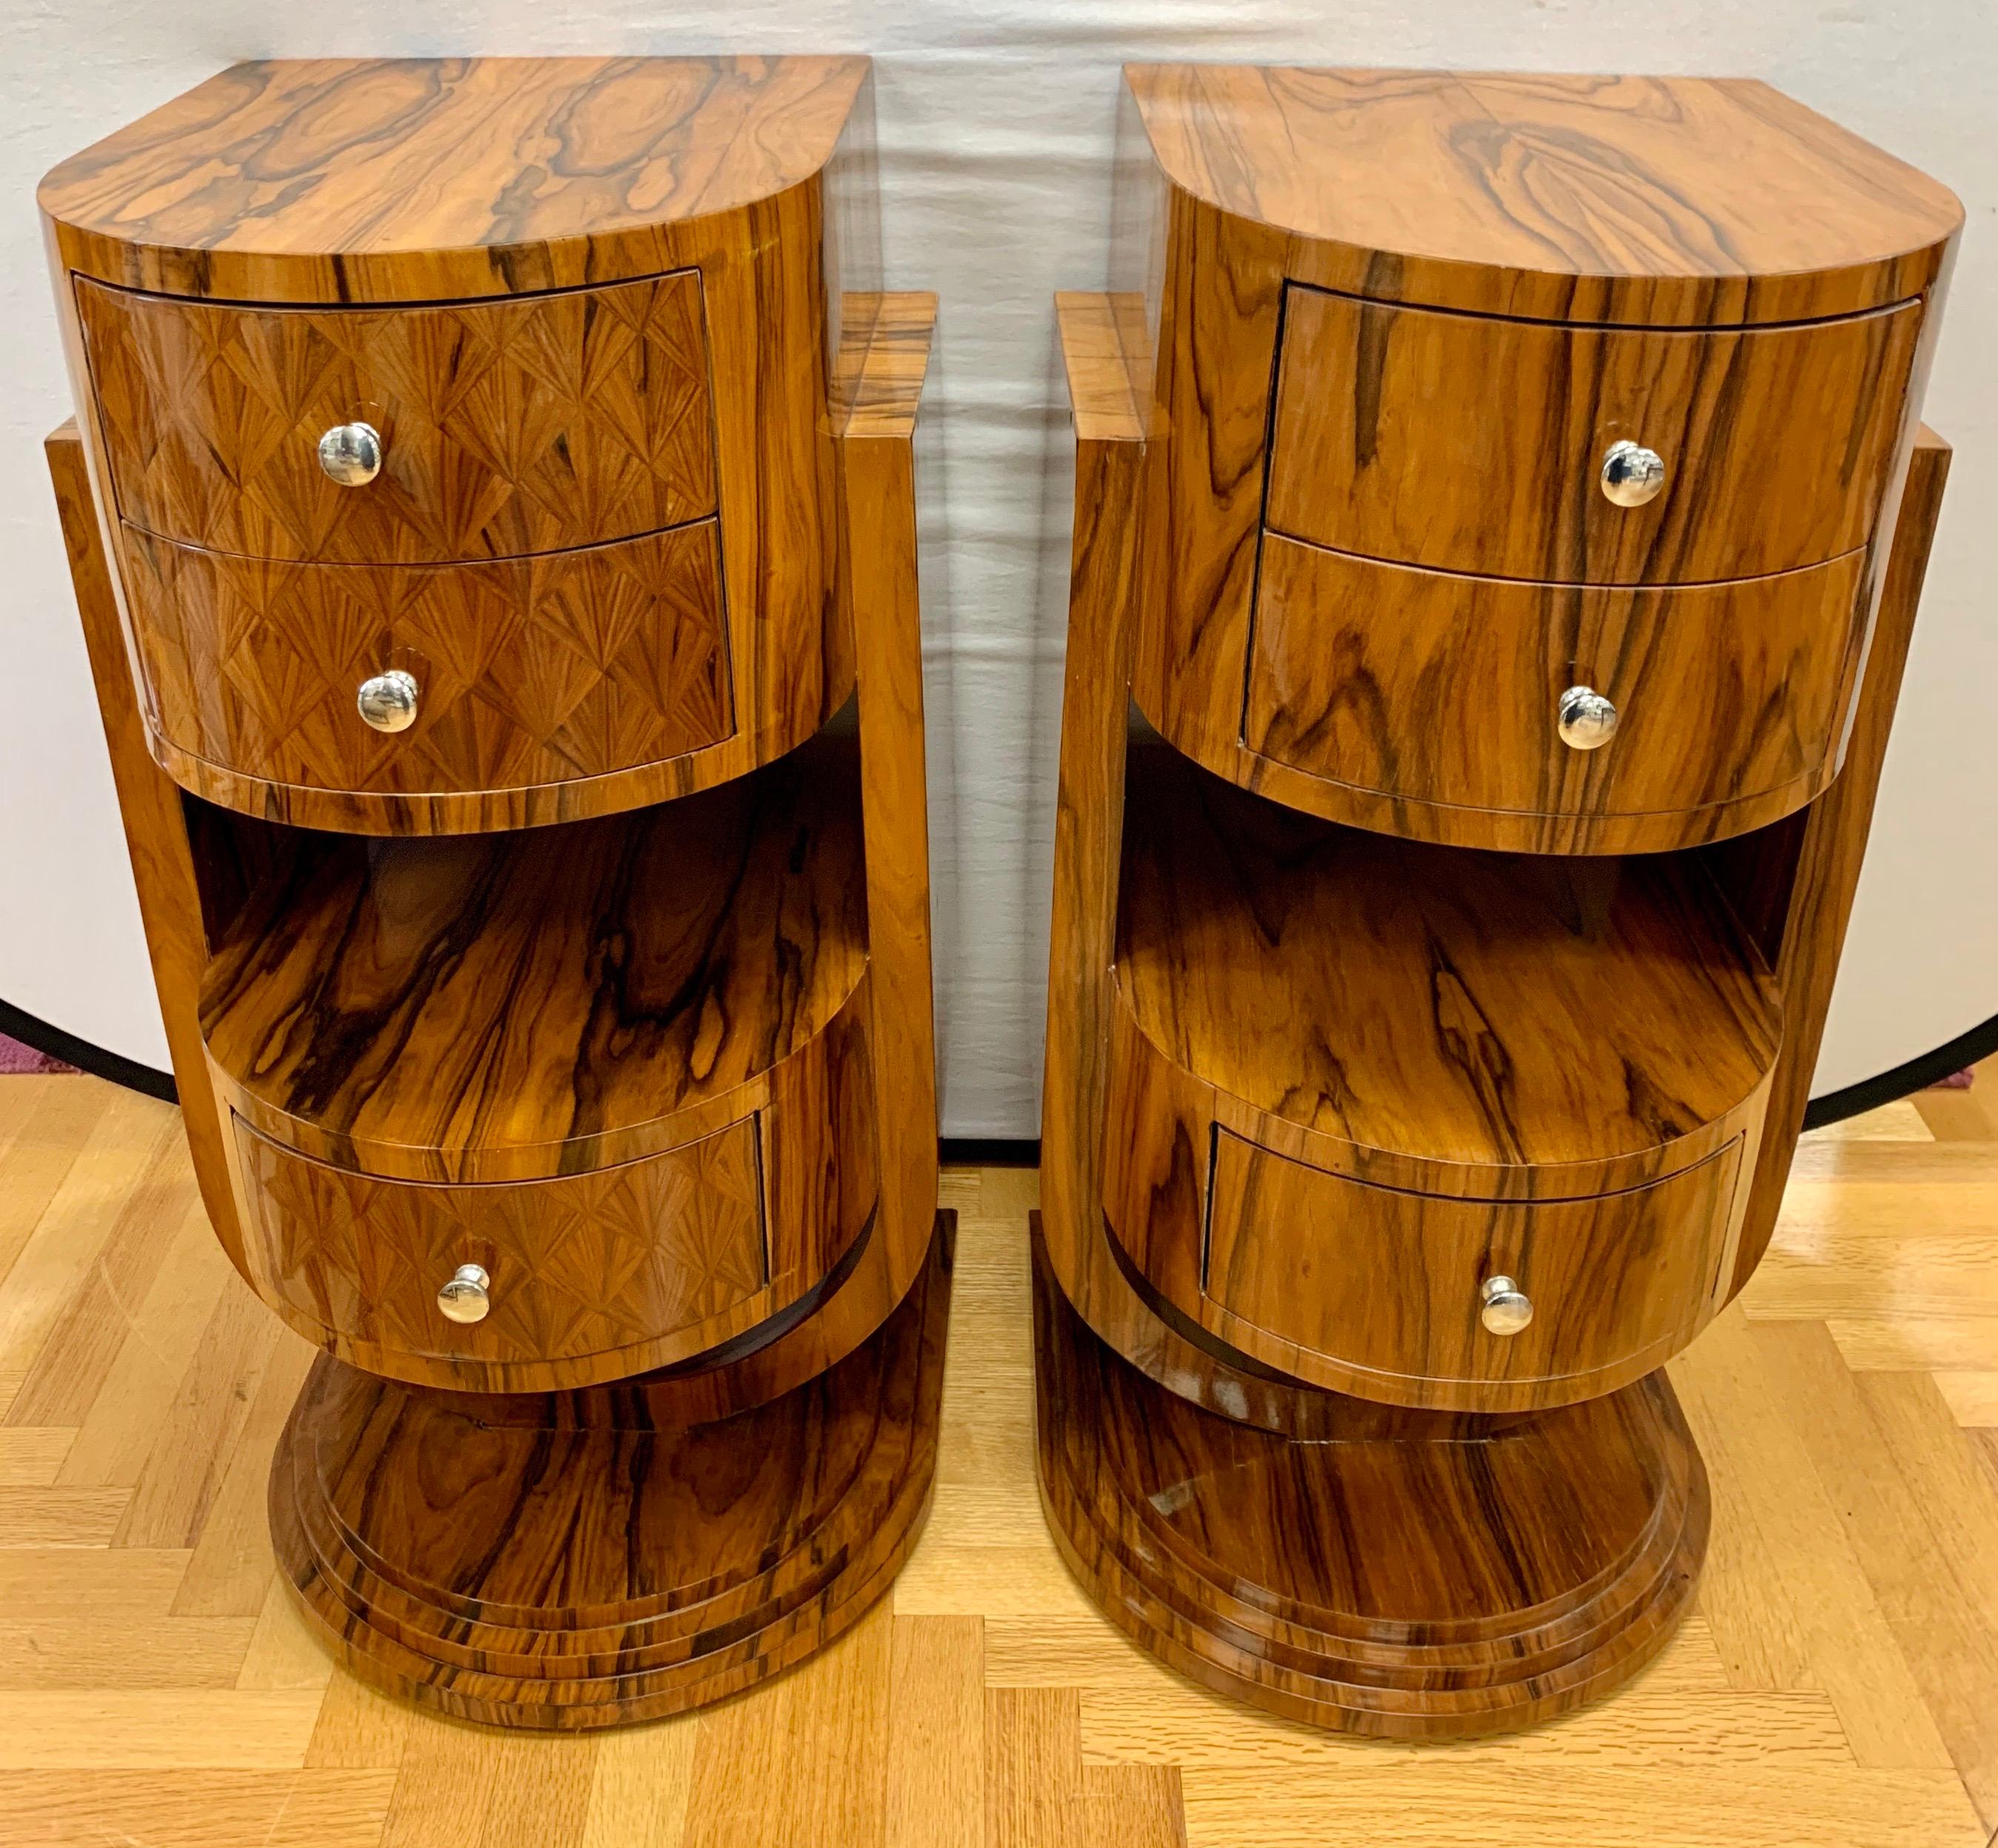 Wonderful pair of curved Art Deco nightstands with bookmatched Macassar wood veneer with three drawers and one shelf for storage. Use them as a set of end tables or as nightstands. Note that they are not identical as the patterns on the drawers